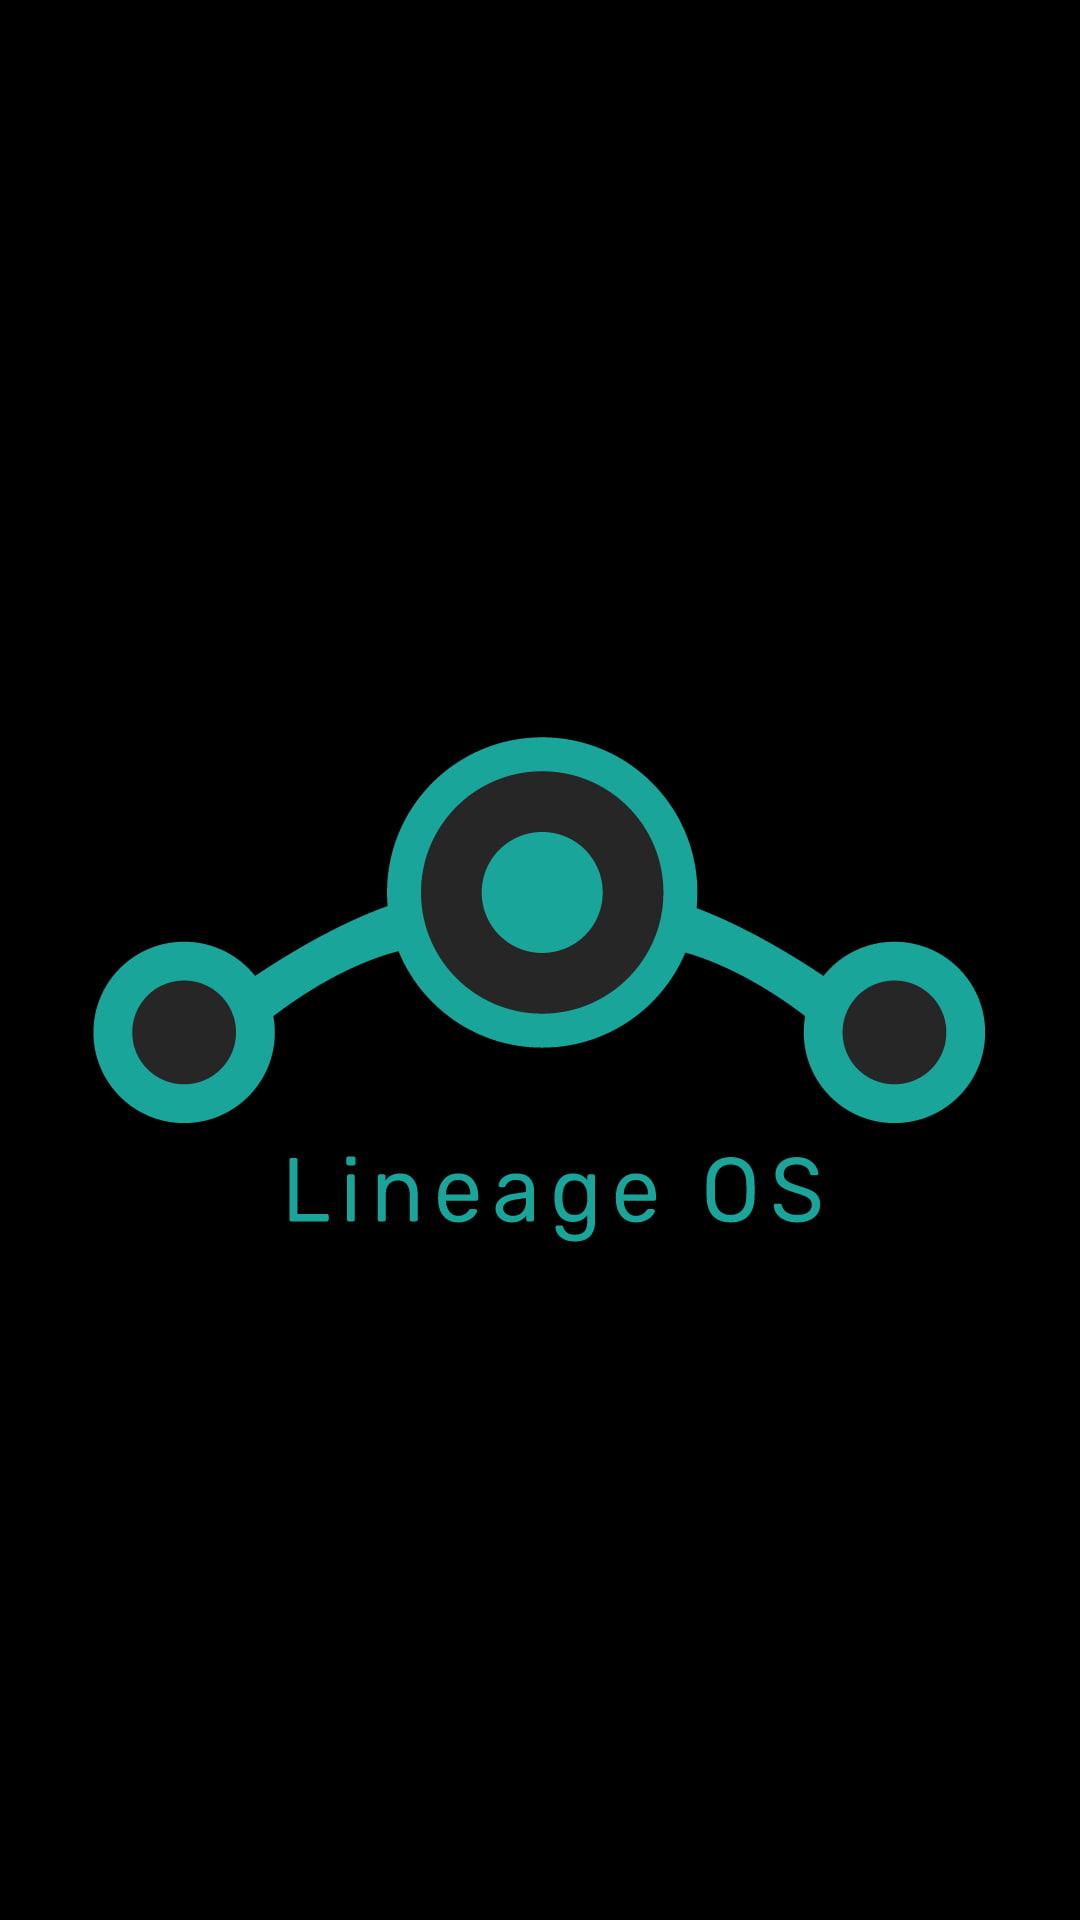 Android (operating System), Lineage OS, minimalism, Simple Background